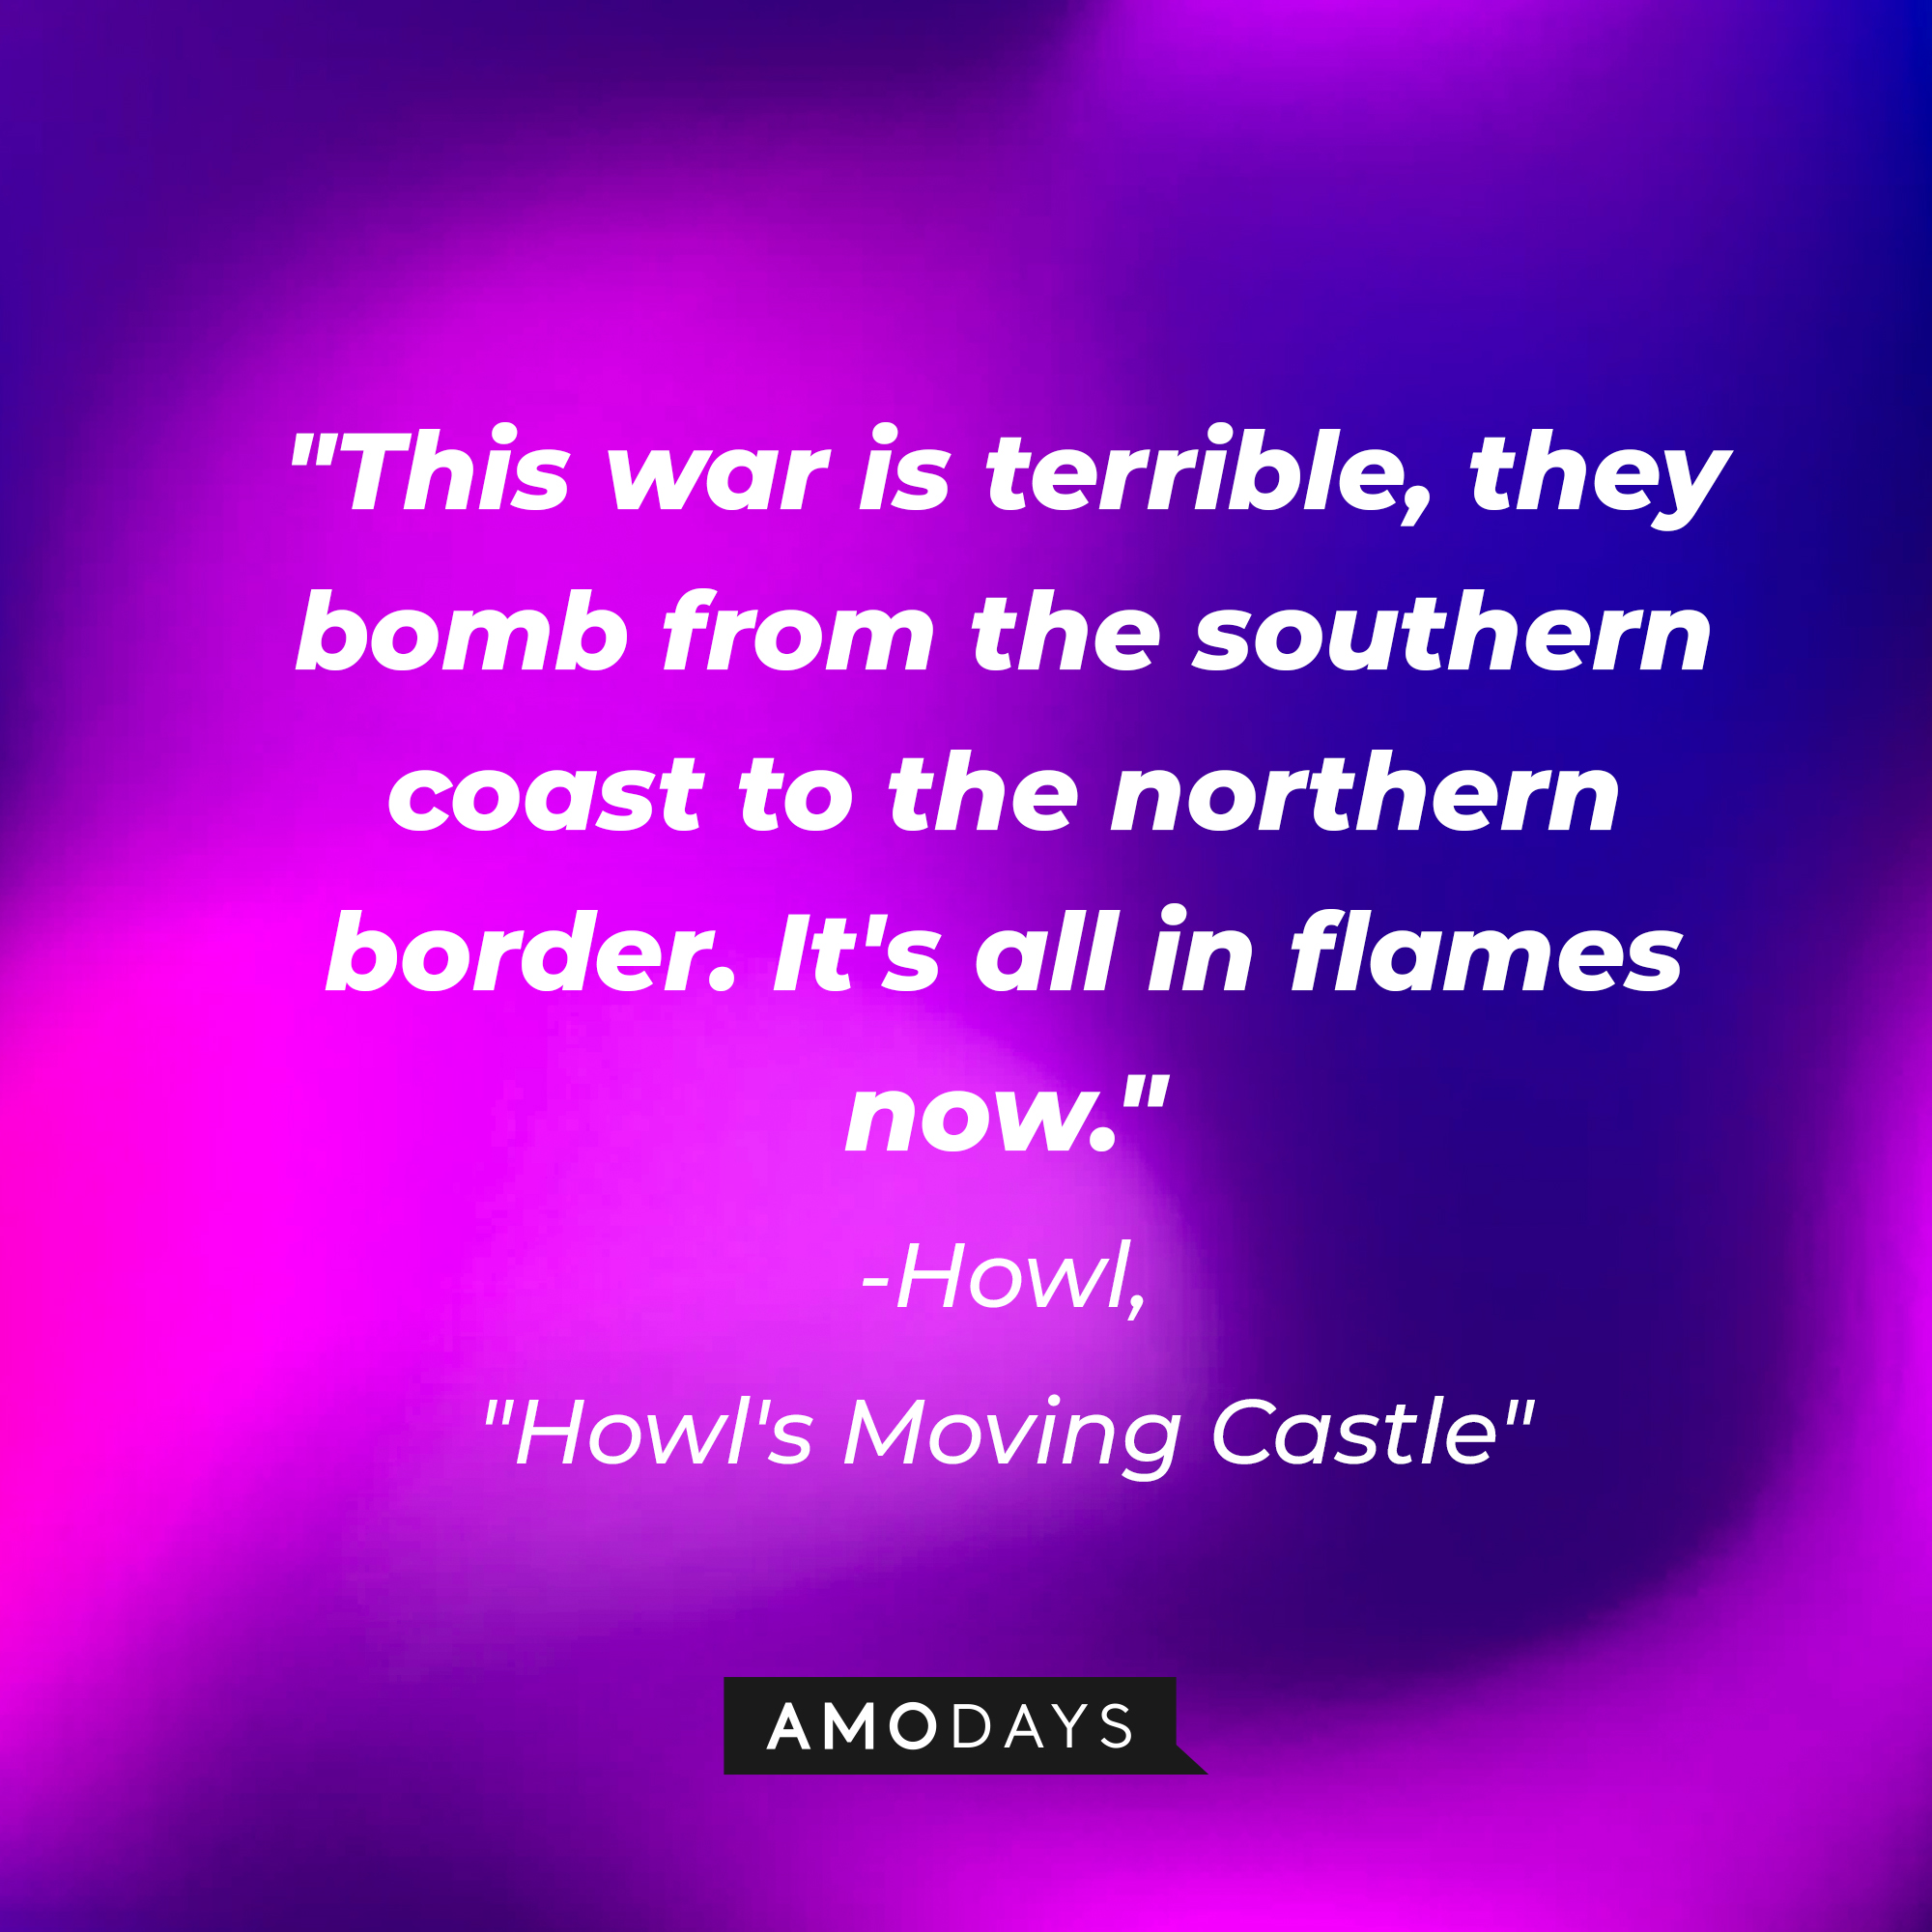 Howl's quote in "Howl's Moving Castle:" "This war is terrible, they bomb from the southern coast to the northern border. It's all in flames now." | Source: AmoDays